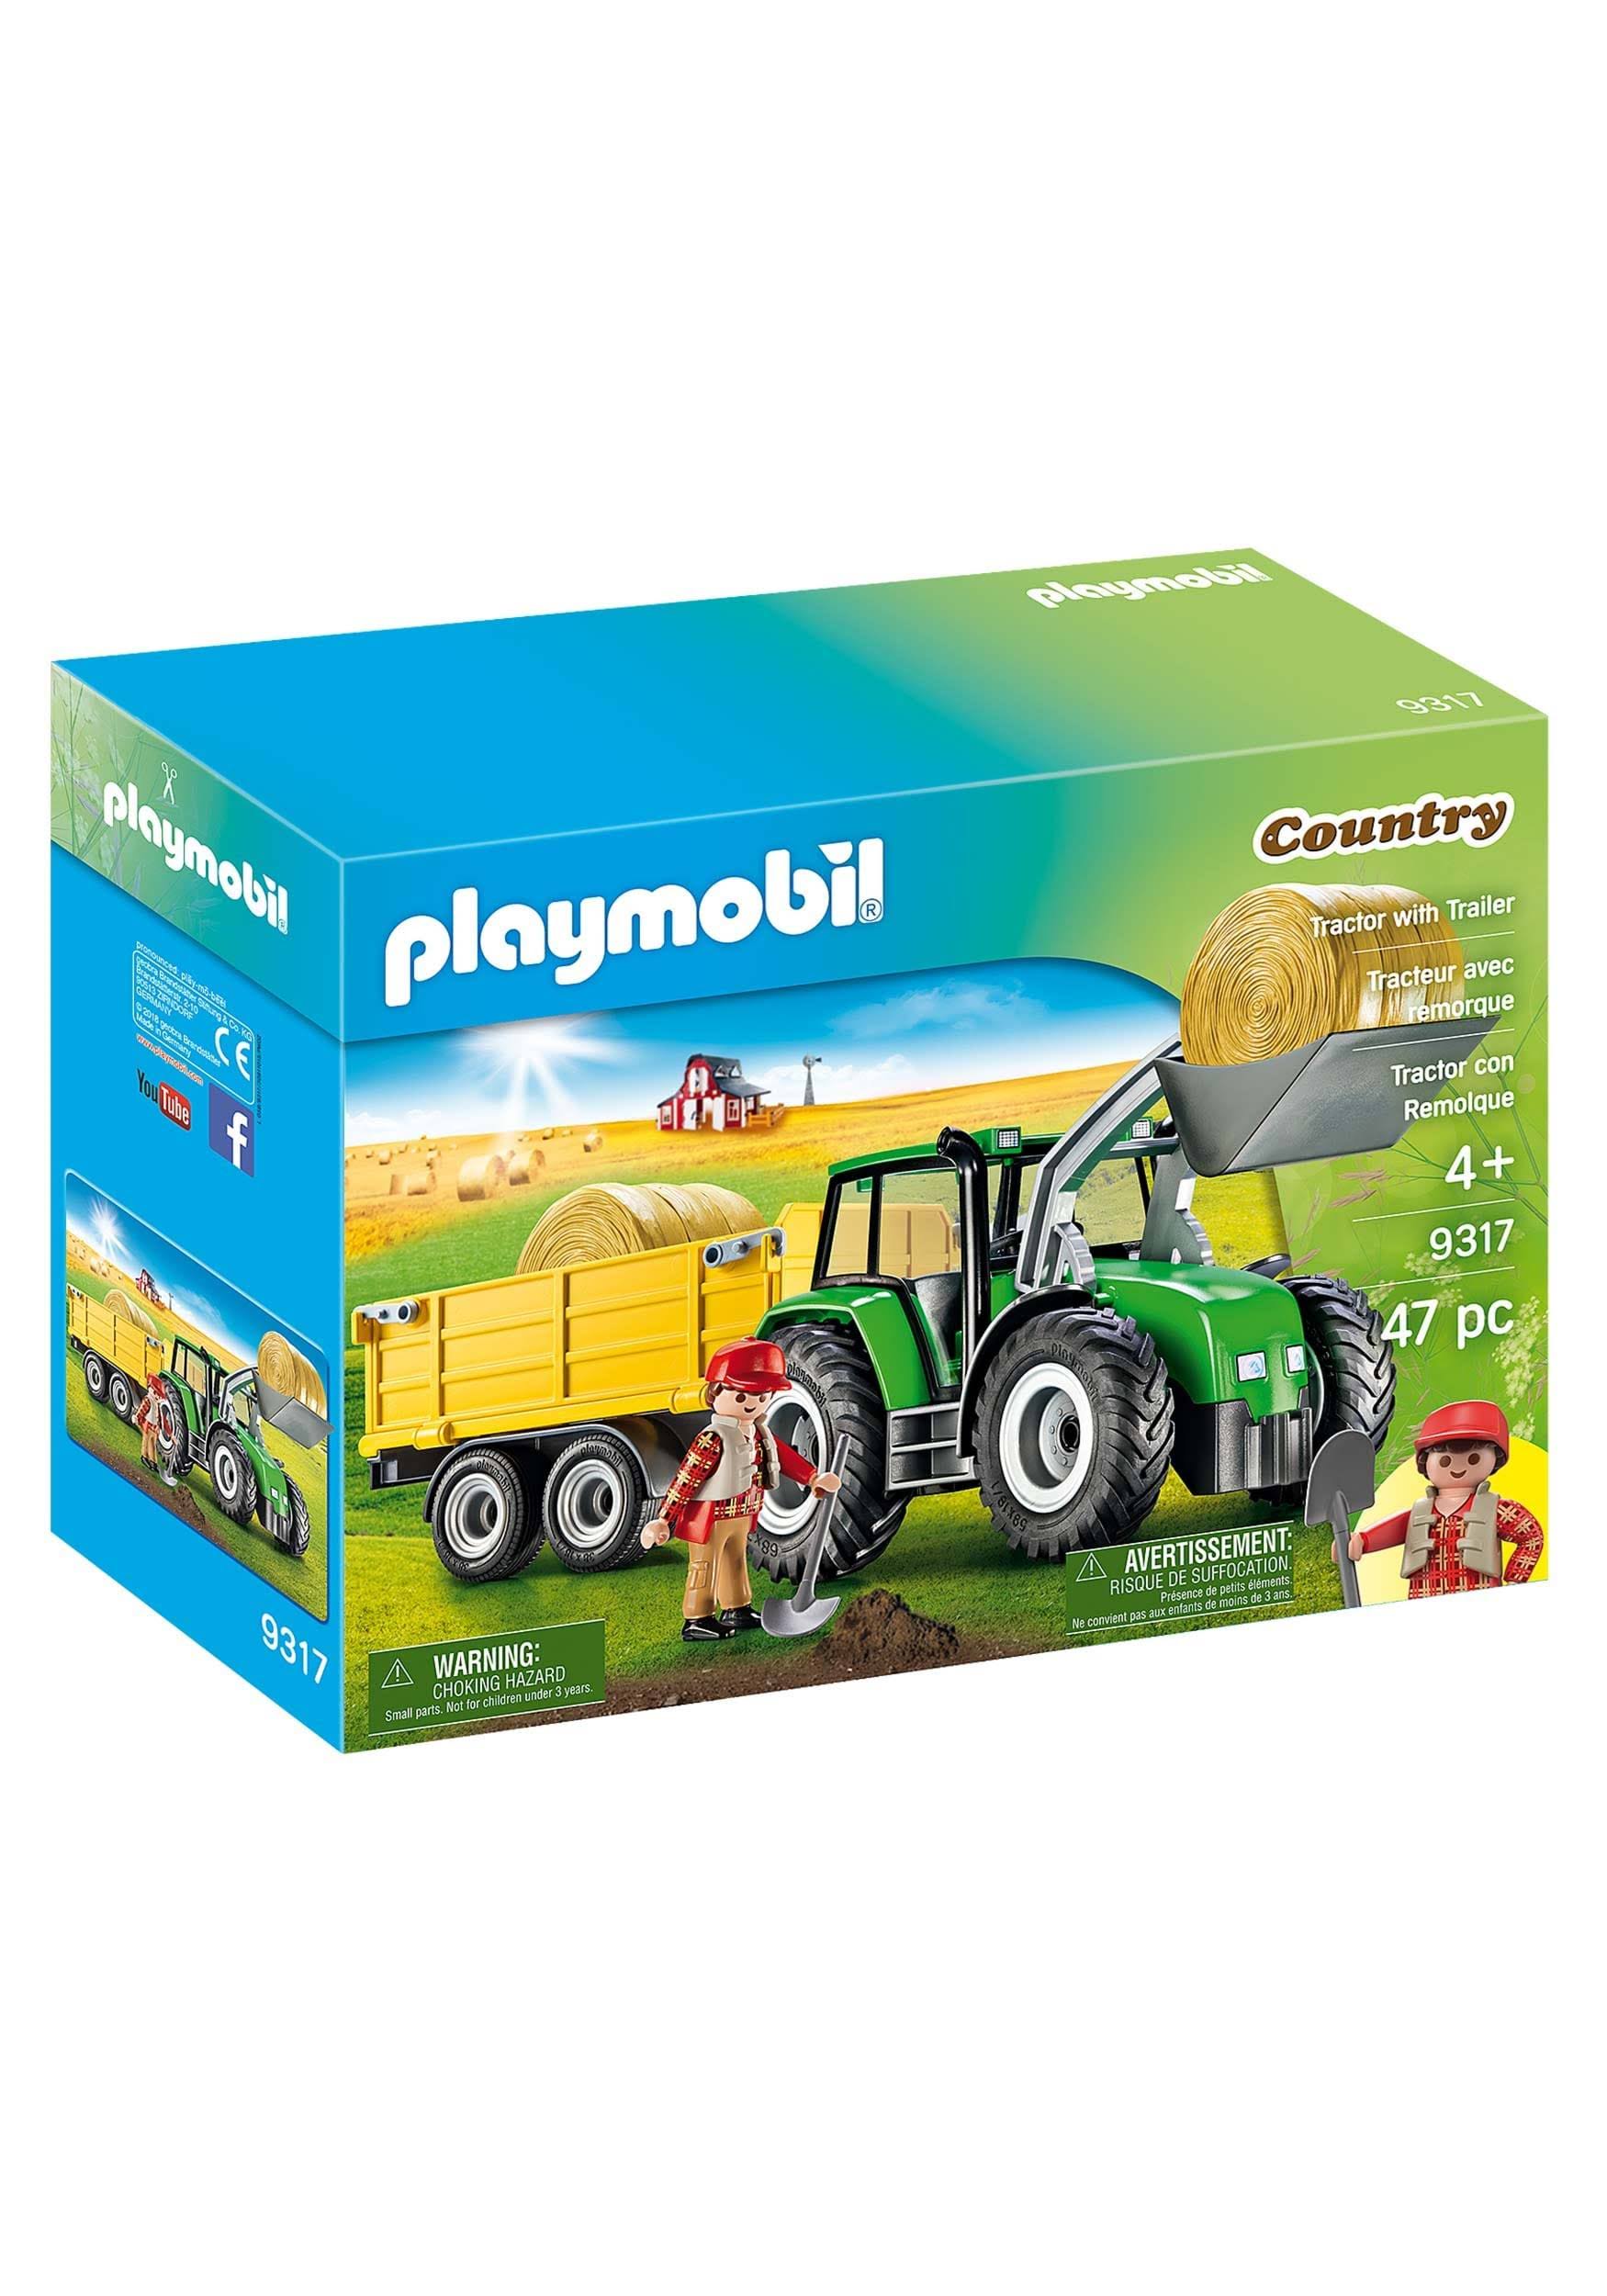 Playmobil 9317 Tractor - With Trailer, 47 Pieces